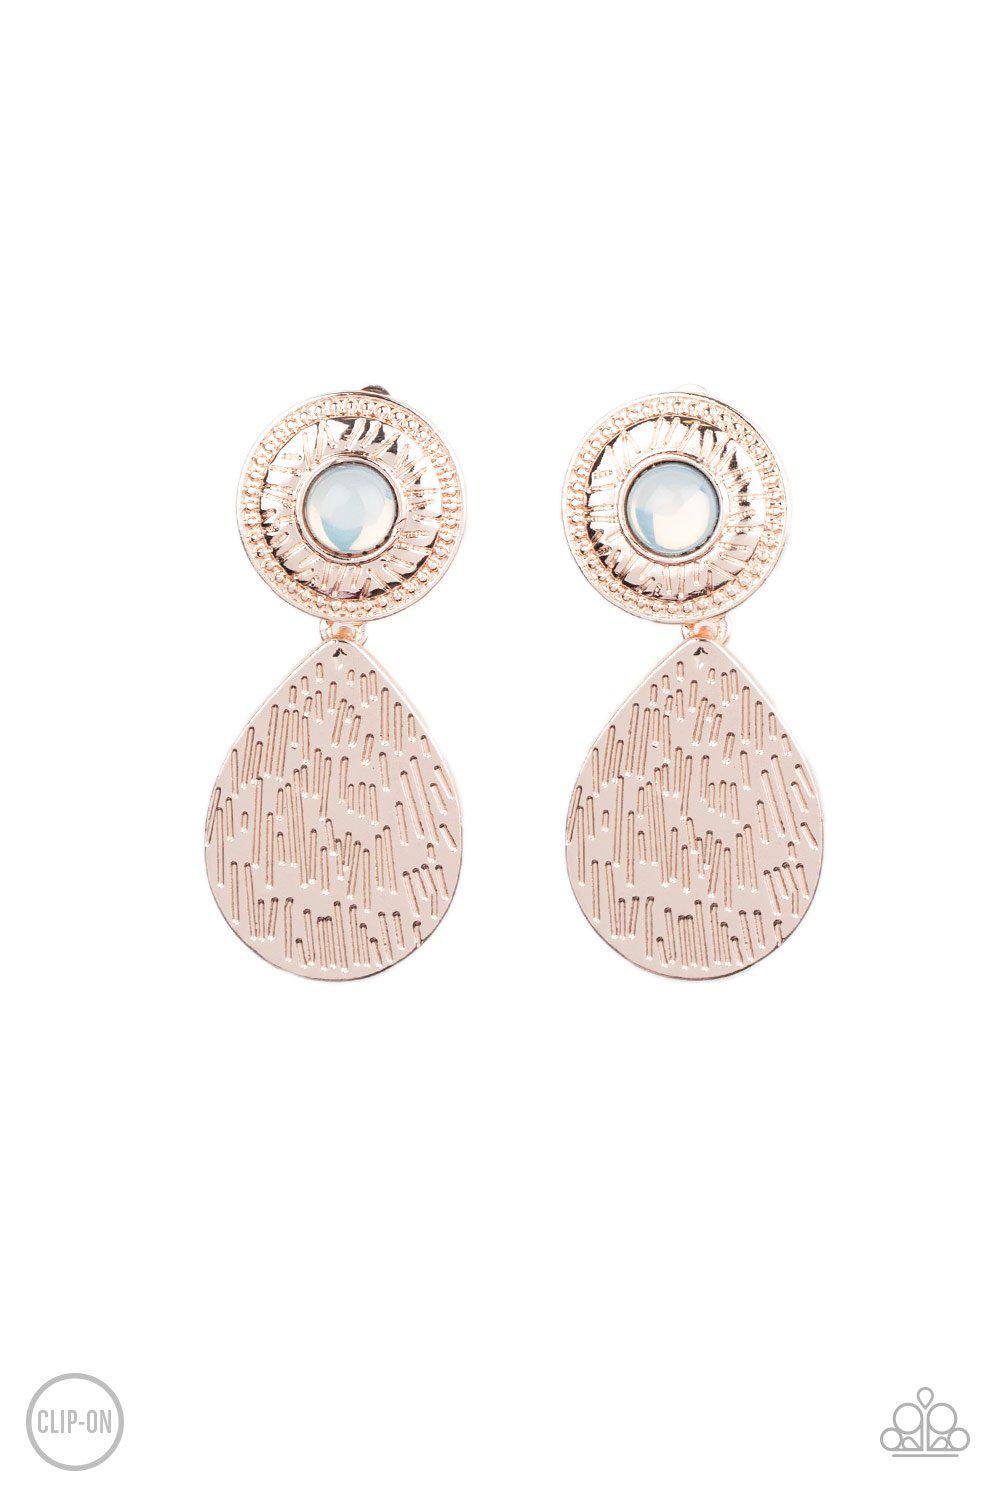 Emblazoned Edge Rose Gold and Opal Clip-On Earrings - Paparazzi Accessories - lightbox -CarasShop.com - $5 Jewelry by Cara Jewels